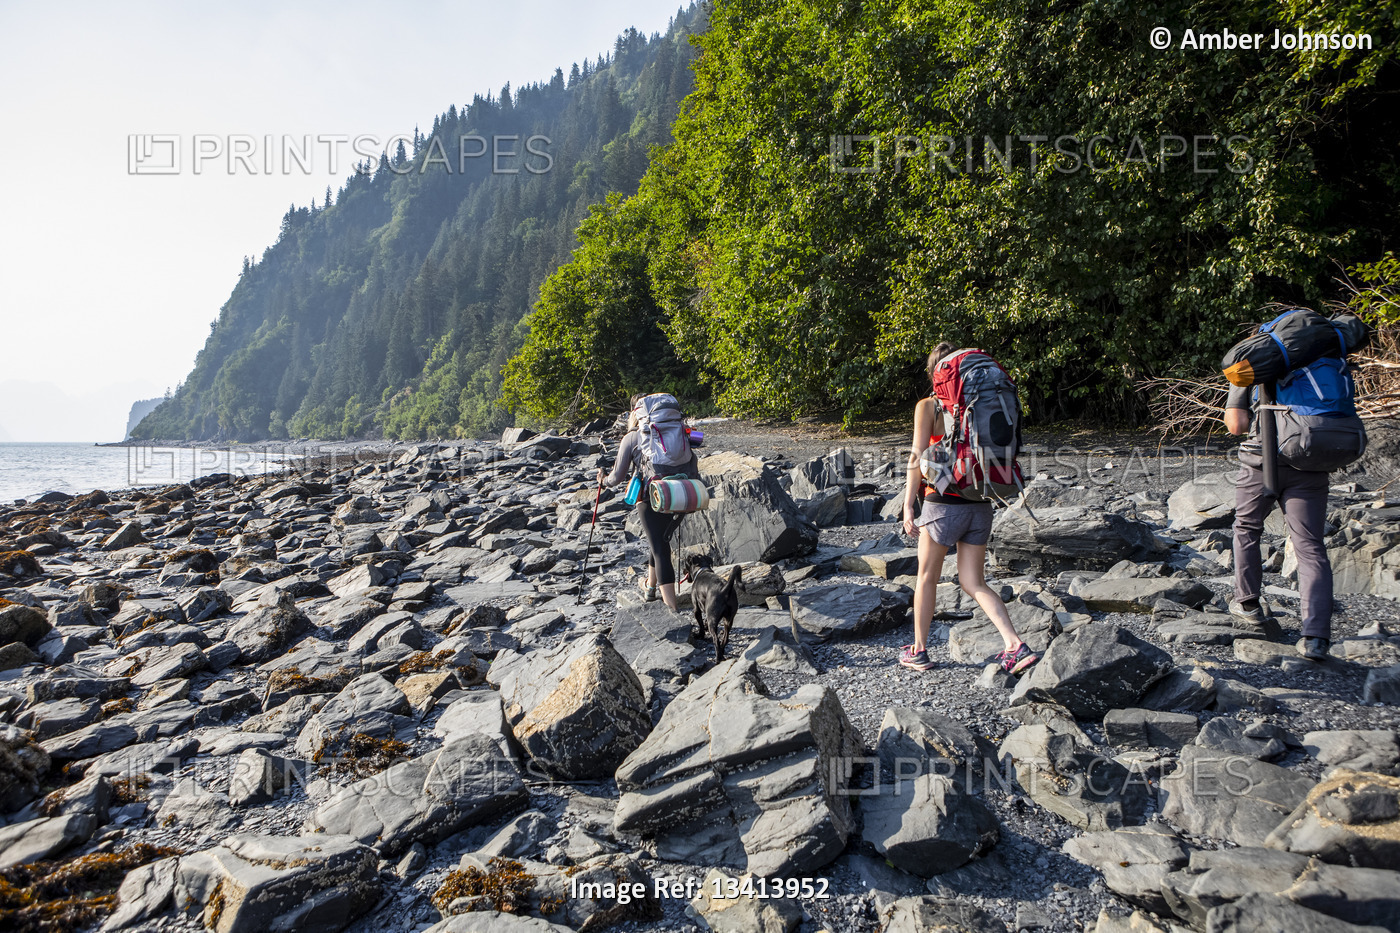 Millennials (one man, two women) backpacking on a rocky beach with their black ...